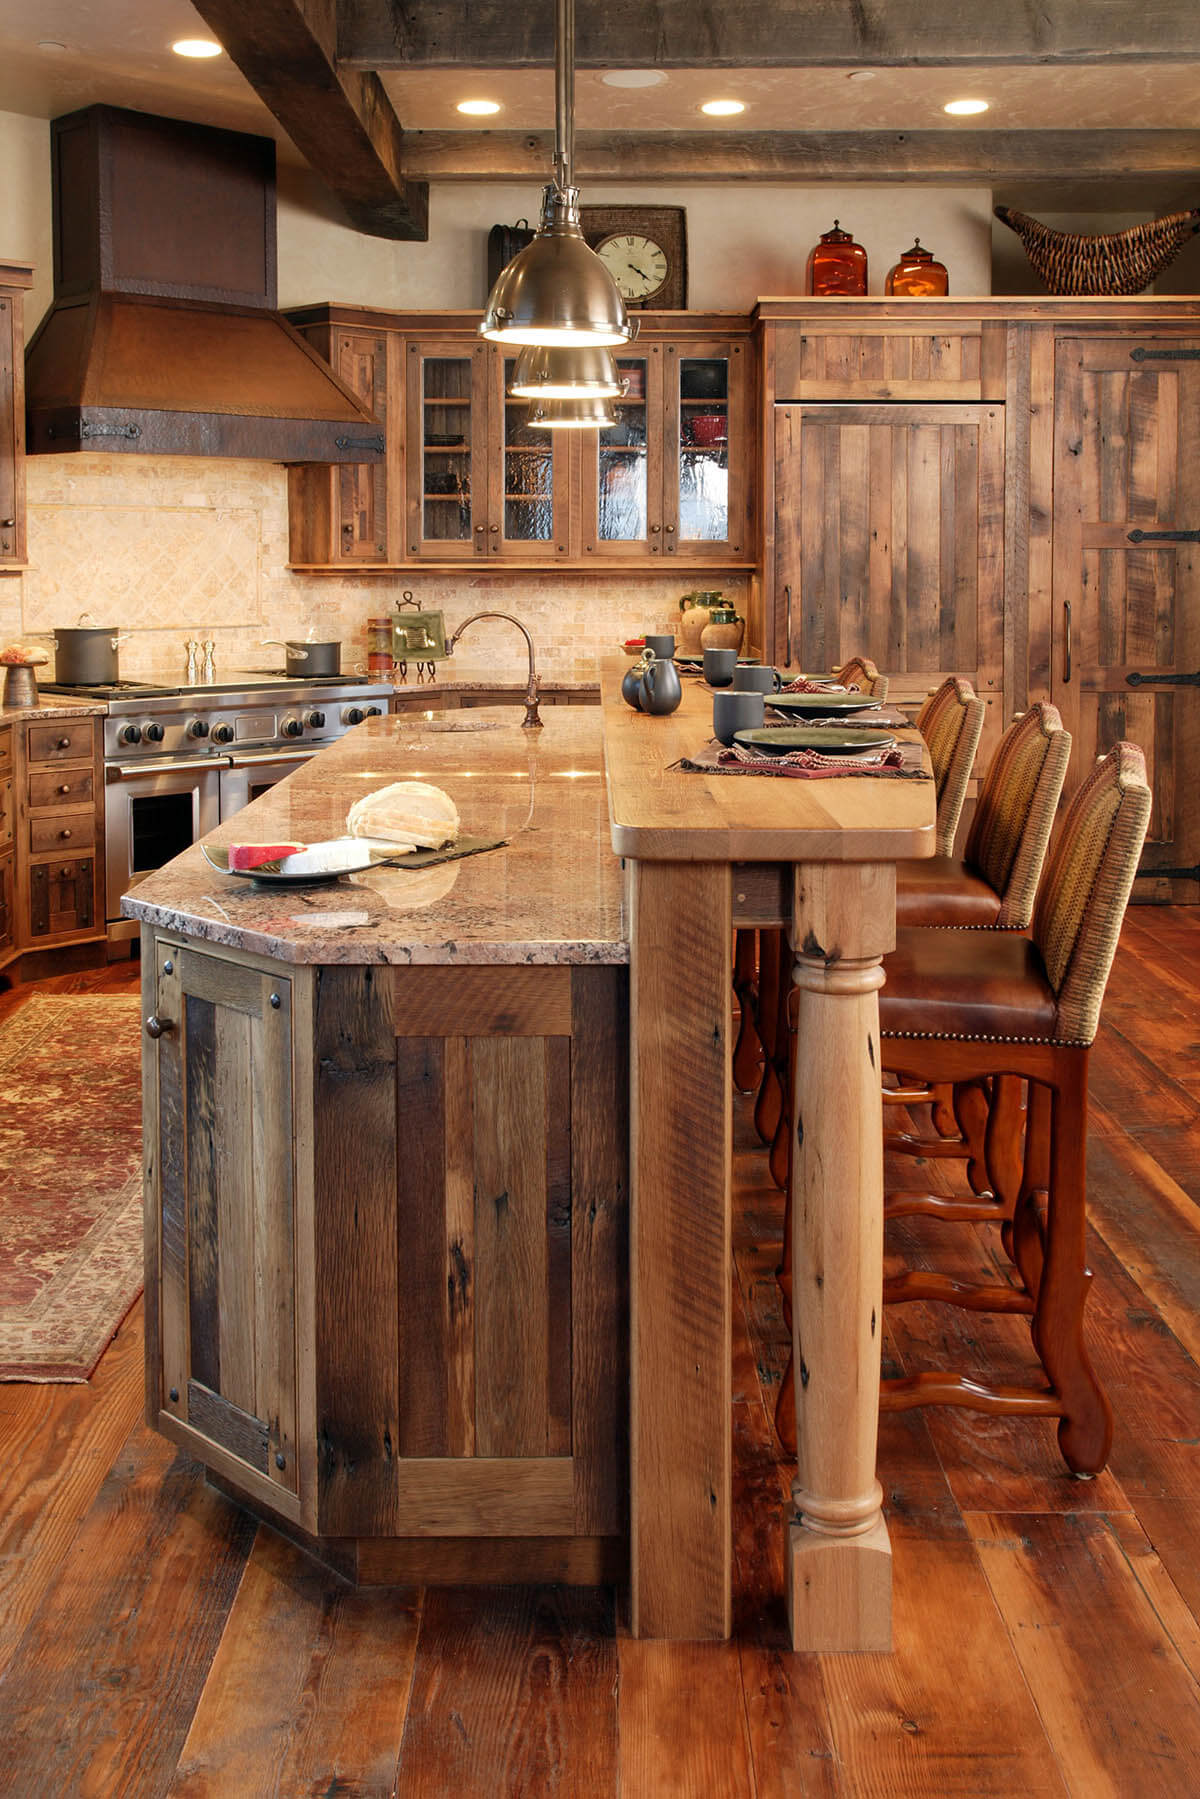 full size of kitchen:awesome modern rustic kitchen small rustic kitchen  designs rustic JMNDYYK